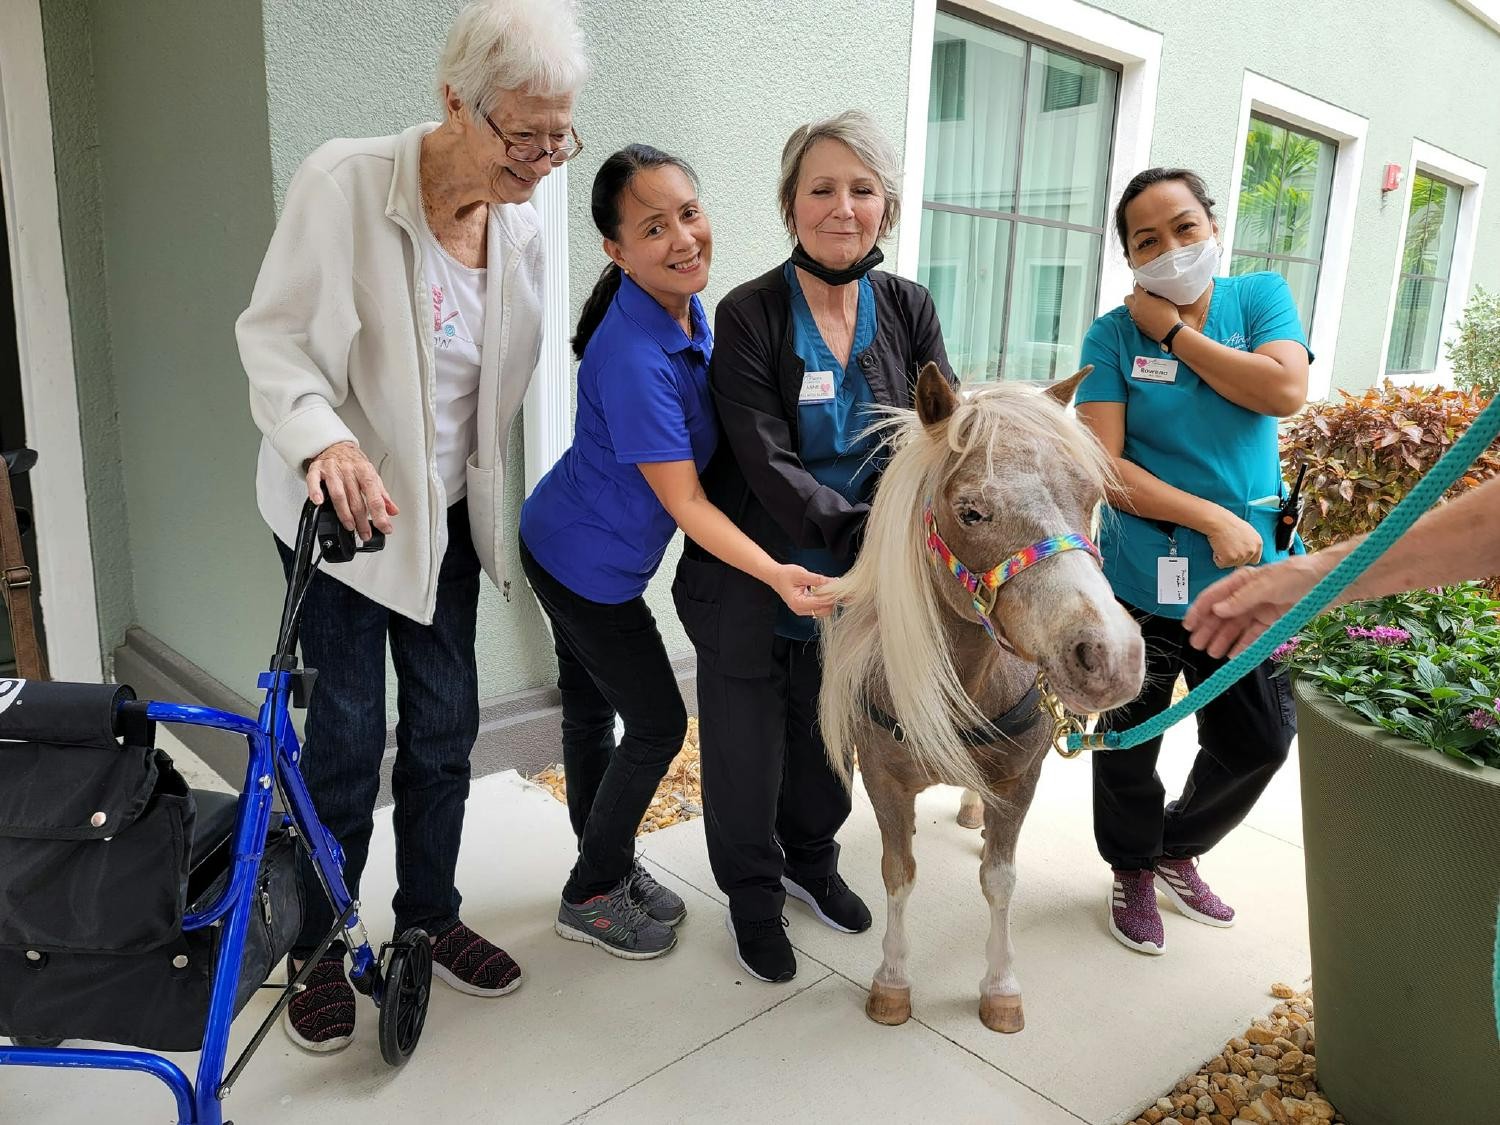 Our residents and staff at The Atrium at Liberty Park love therapy pony visits!